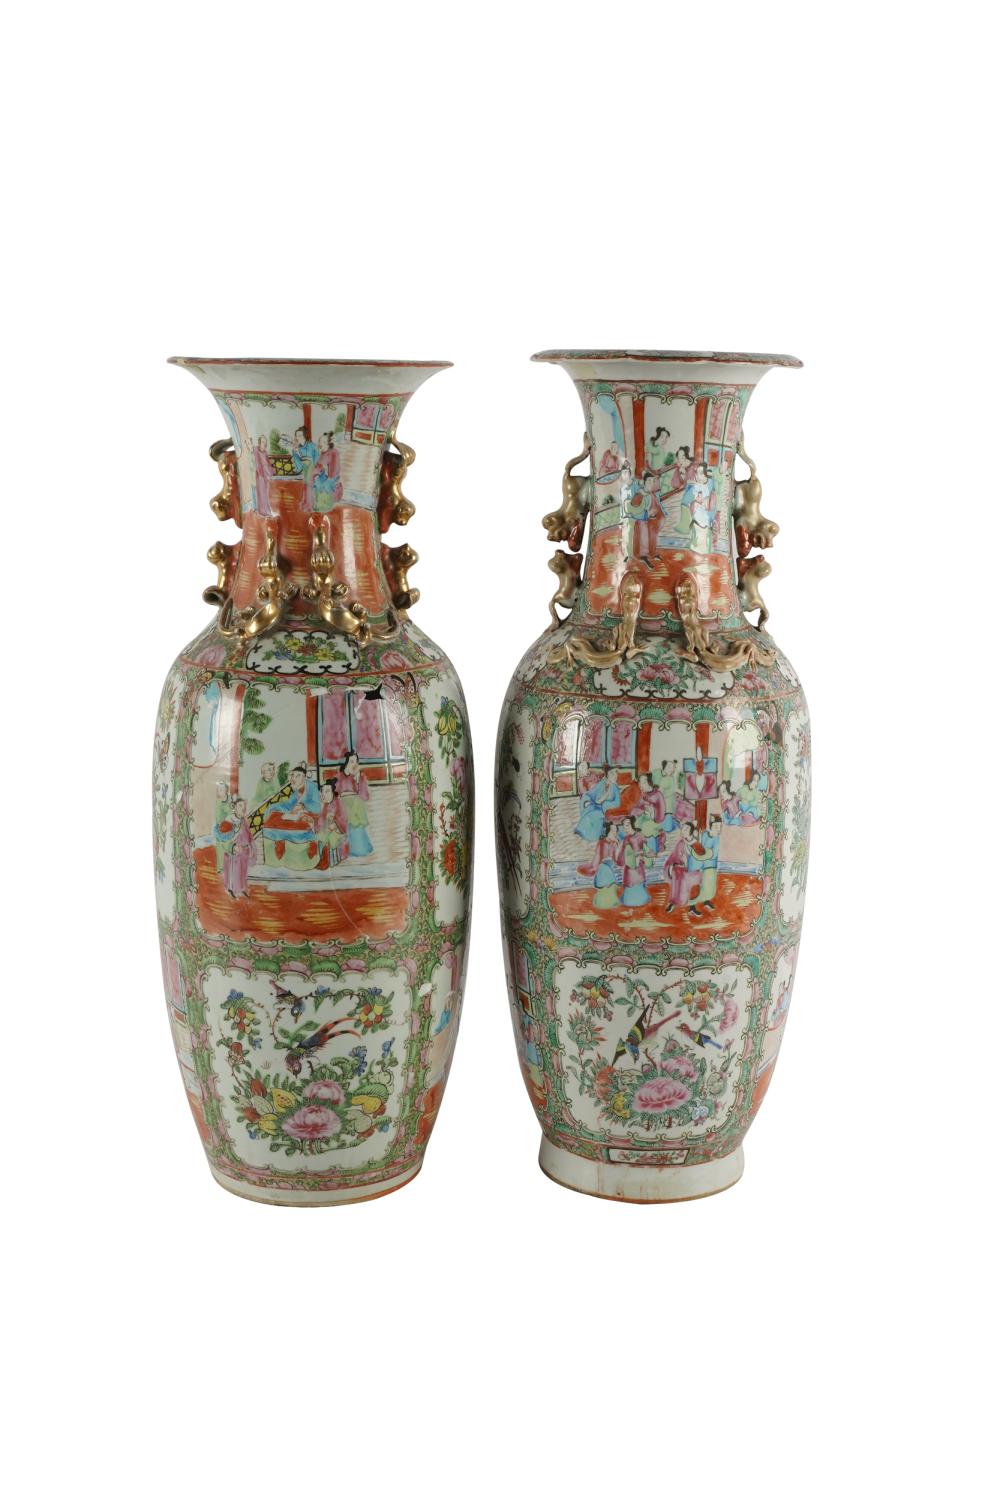 TWO CHINESE ROSE CANTON PORCELAIN